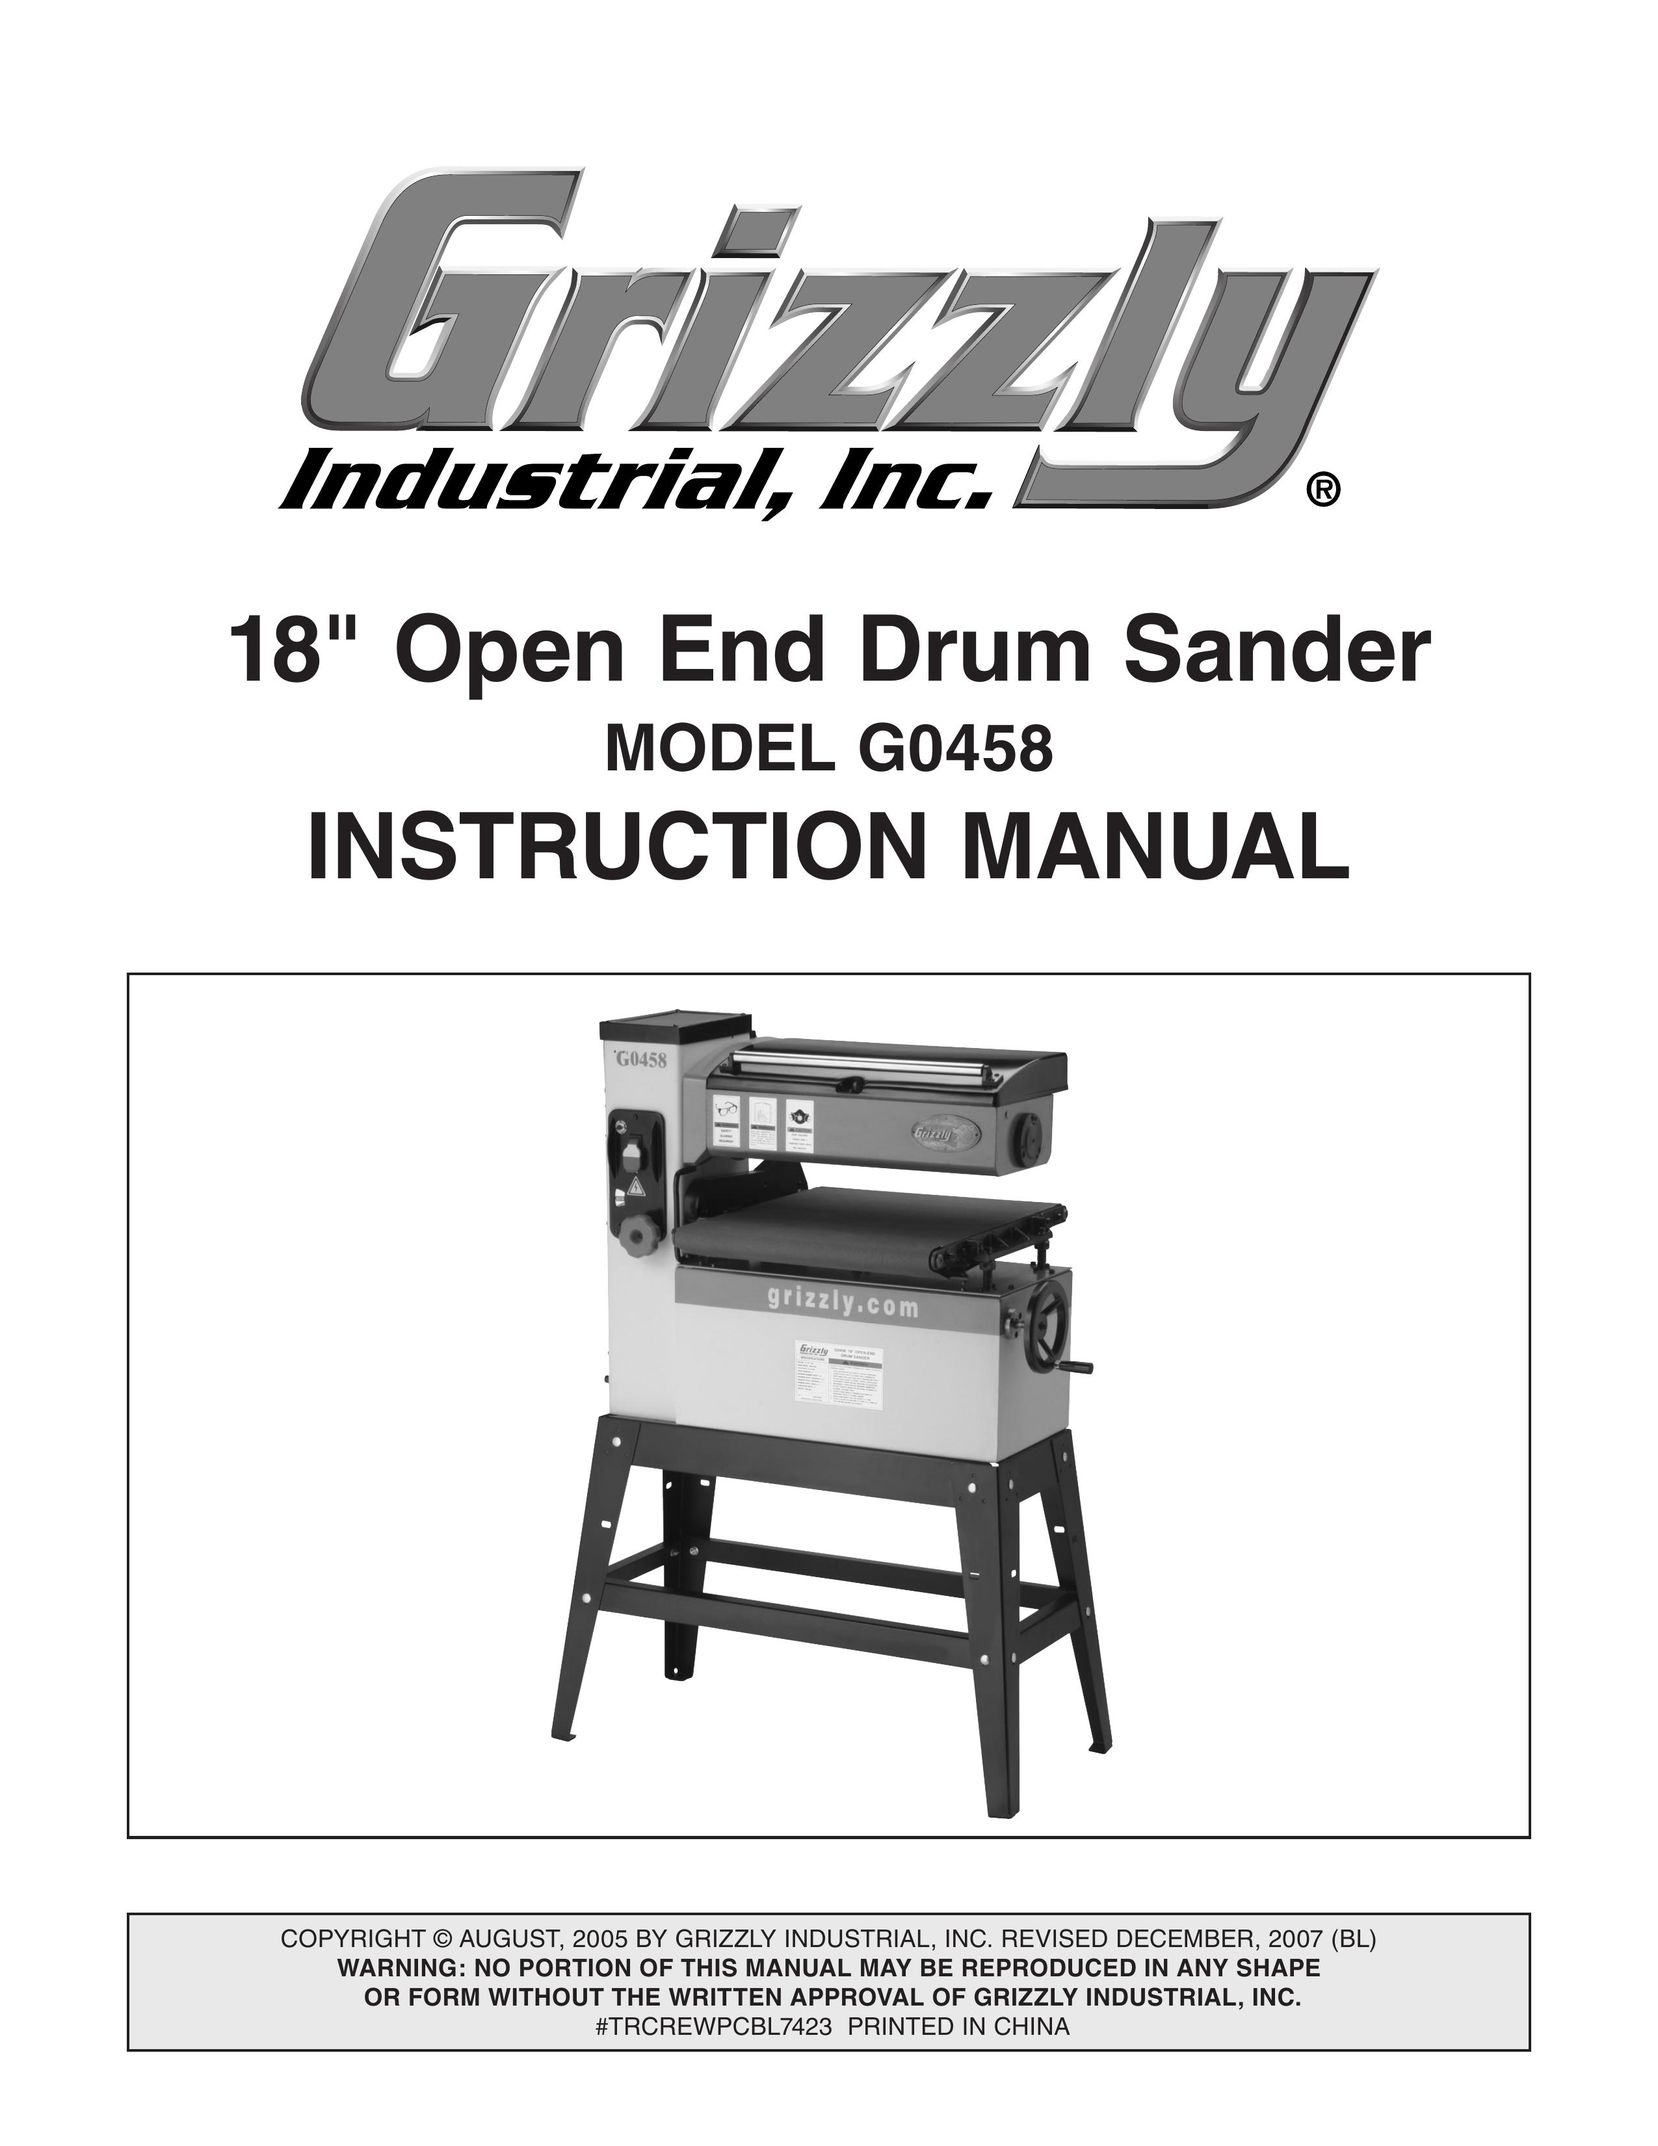 Grizzly G0458 Sander User Manual